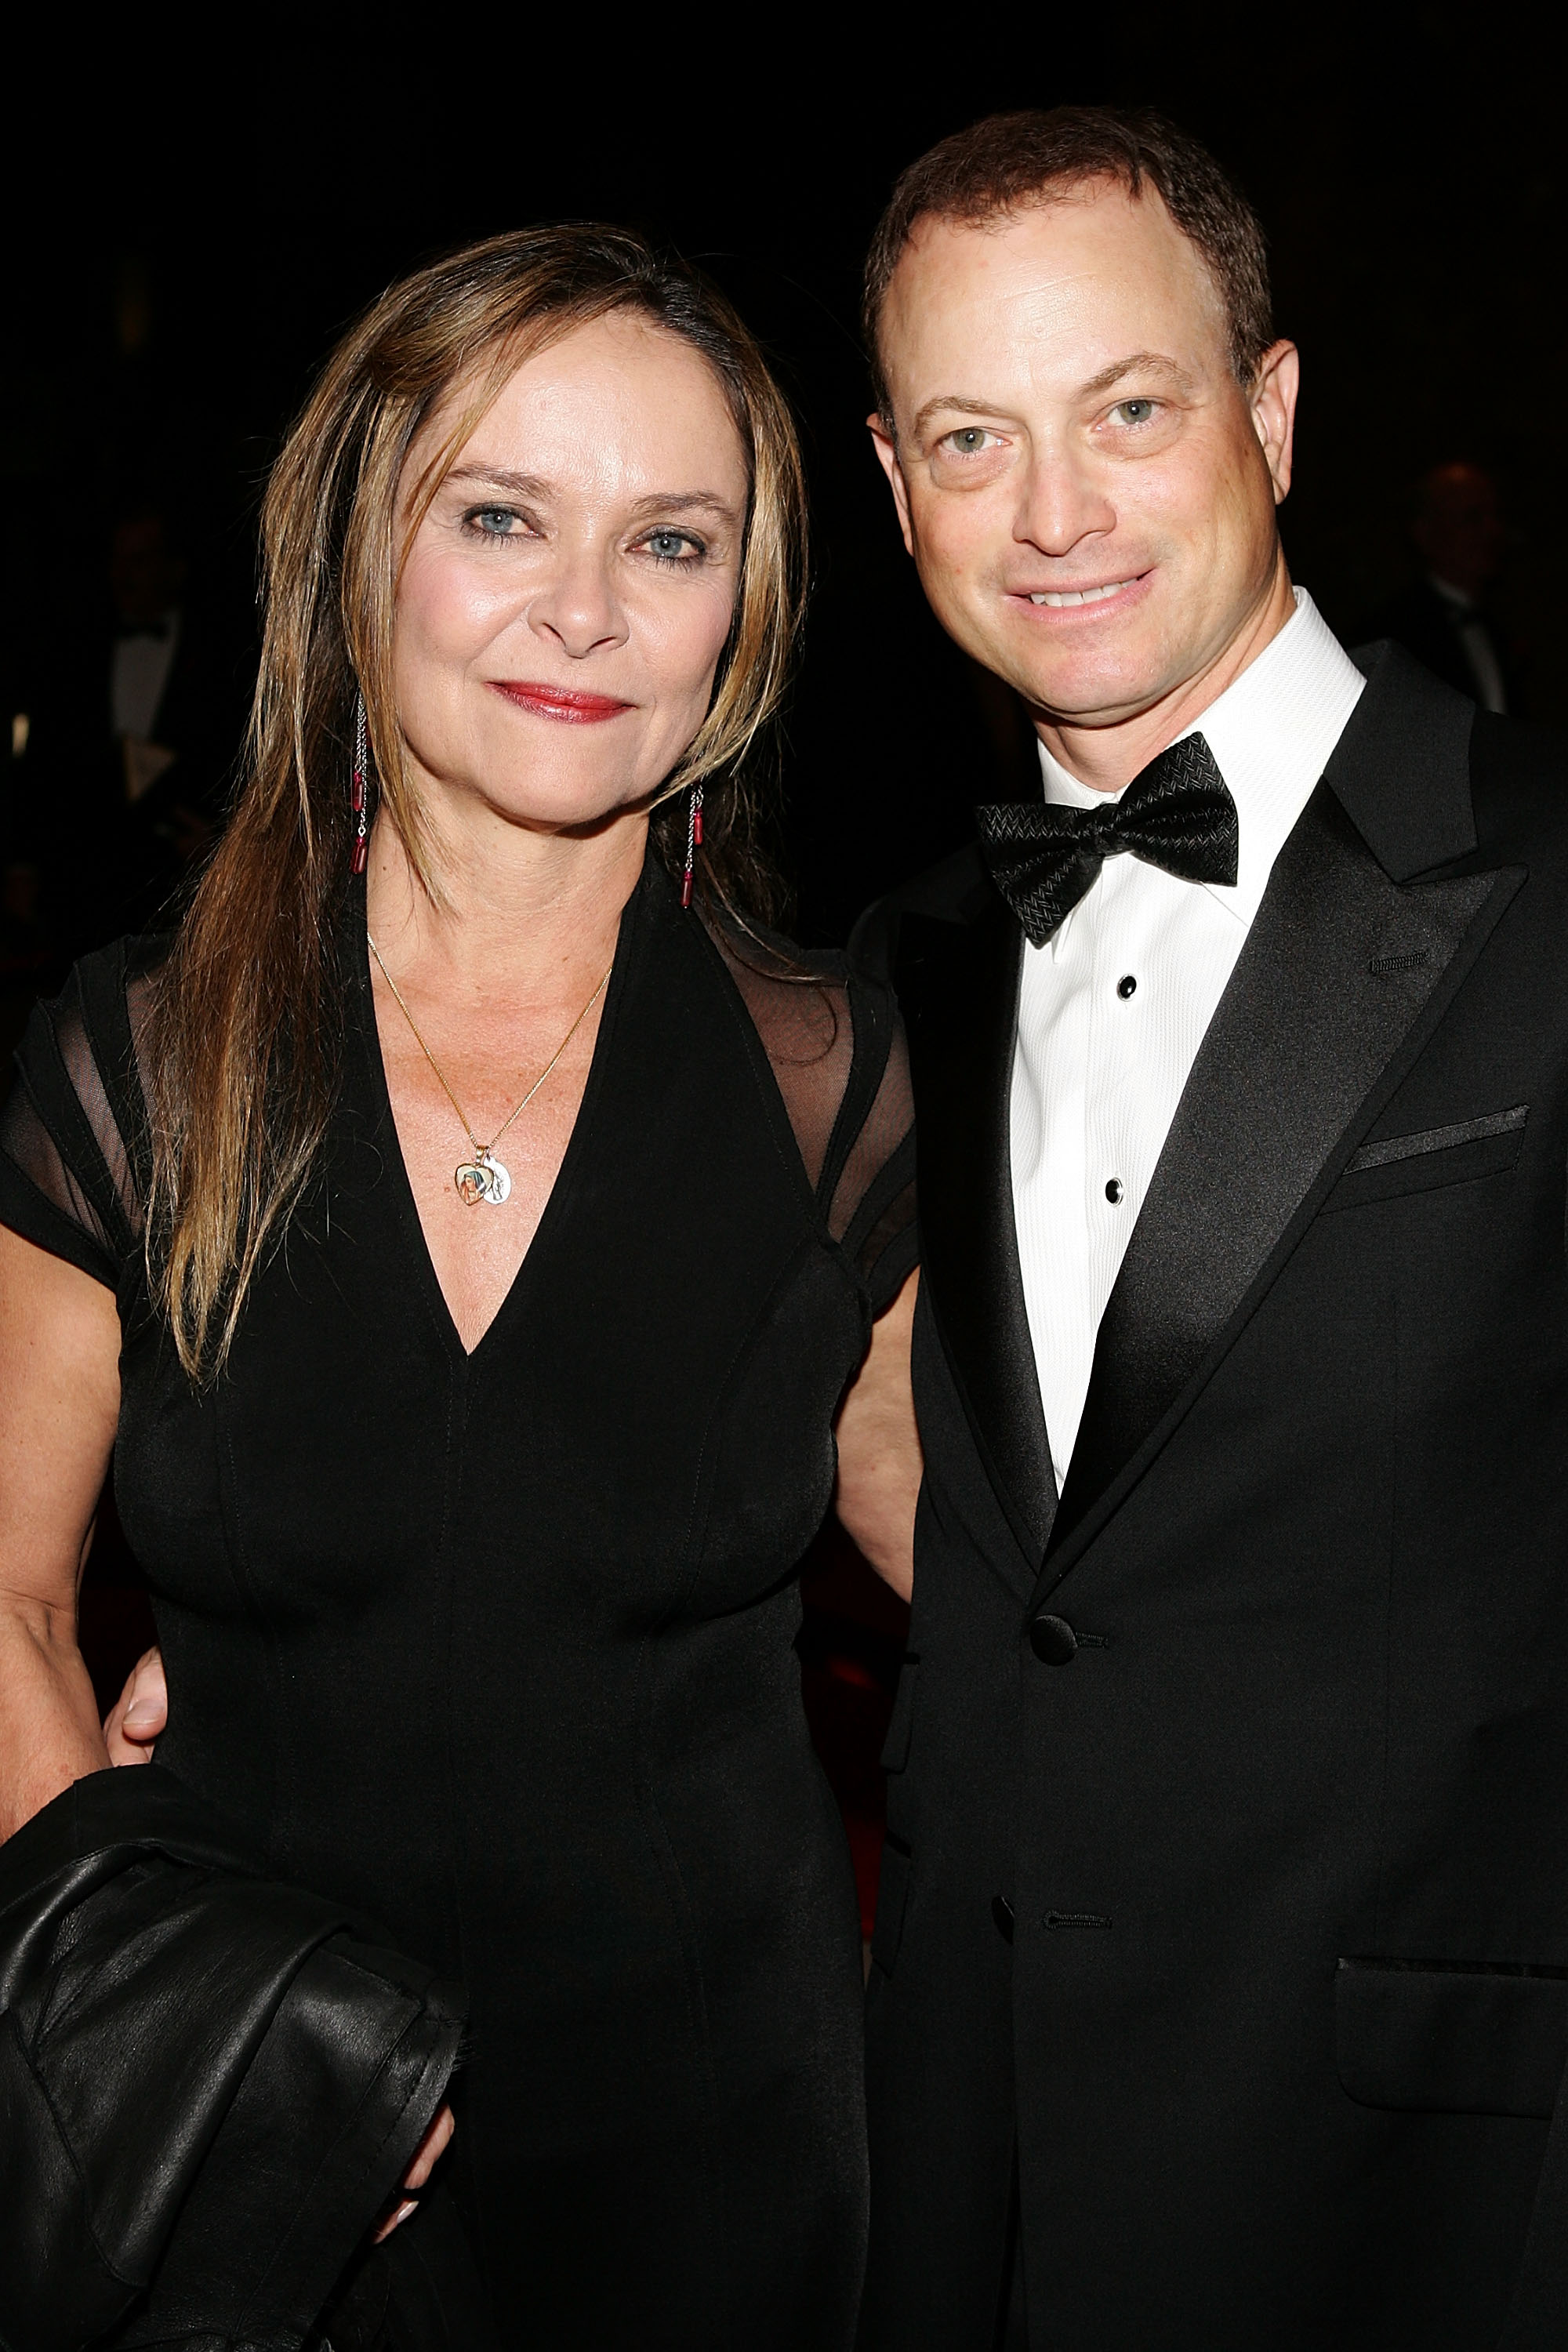 Moira Harris and Gary Sinise at the 17th Annual Palm Springs International Film Festival Gala Awards Presentation red carpet in Palm Springs, California | Source: Getty Images